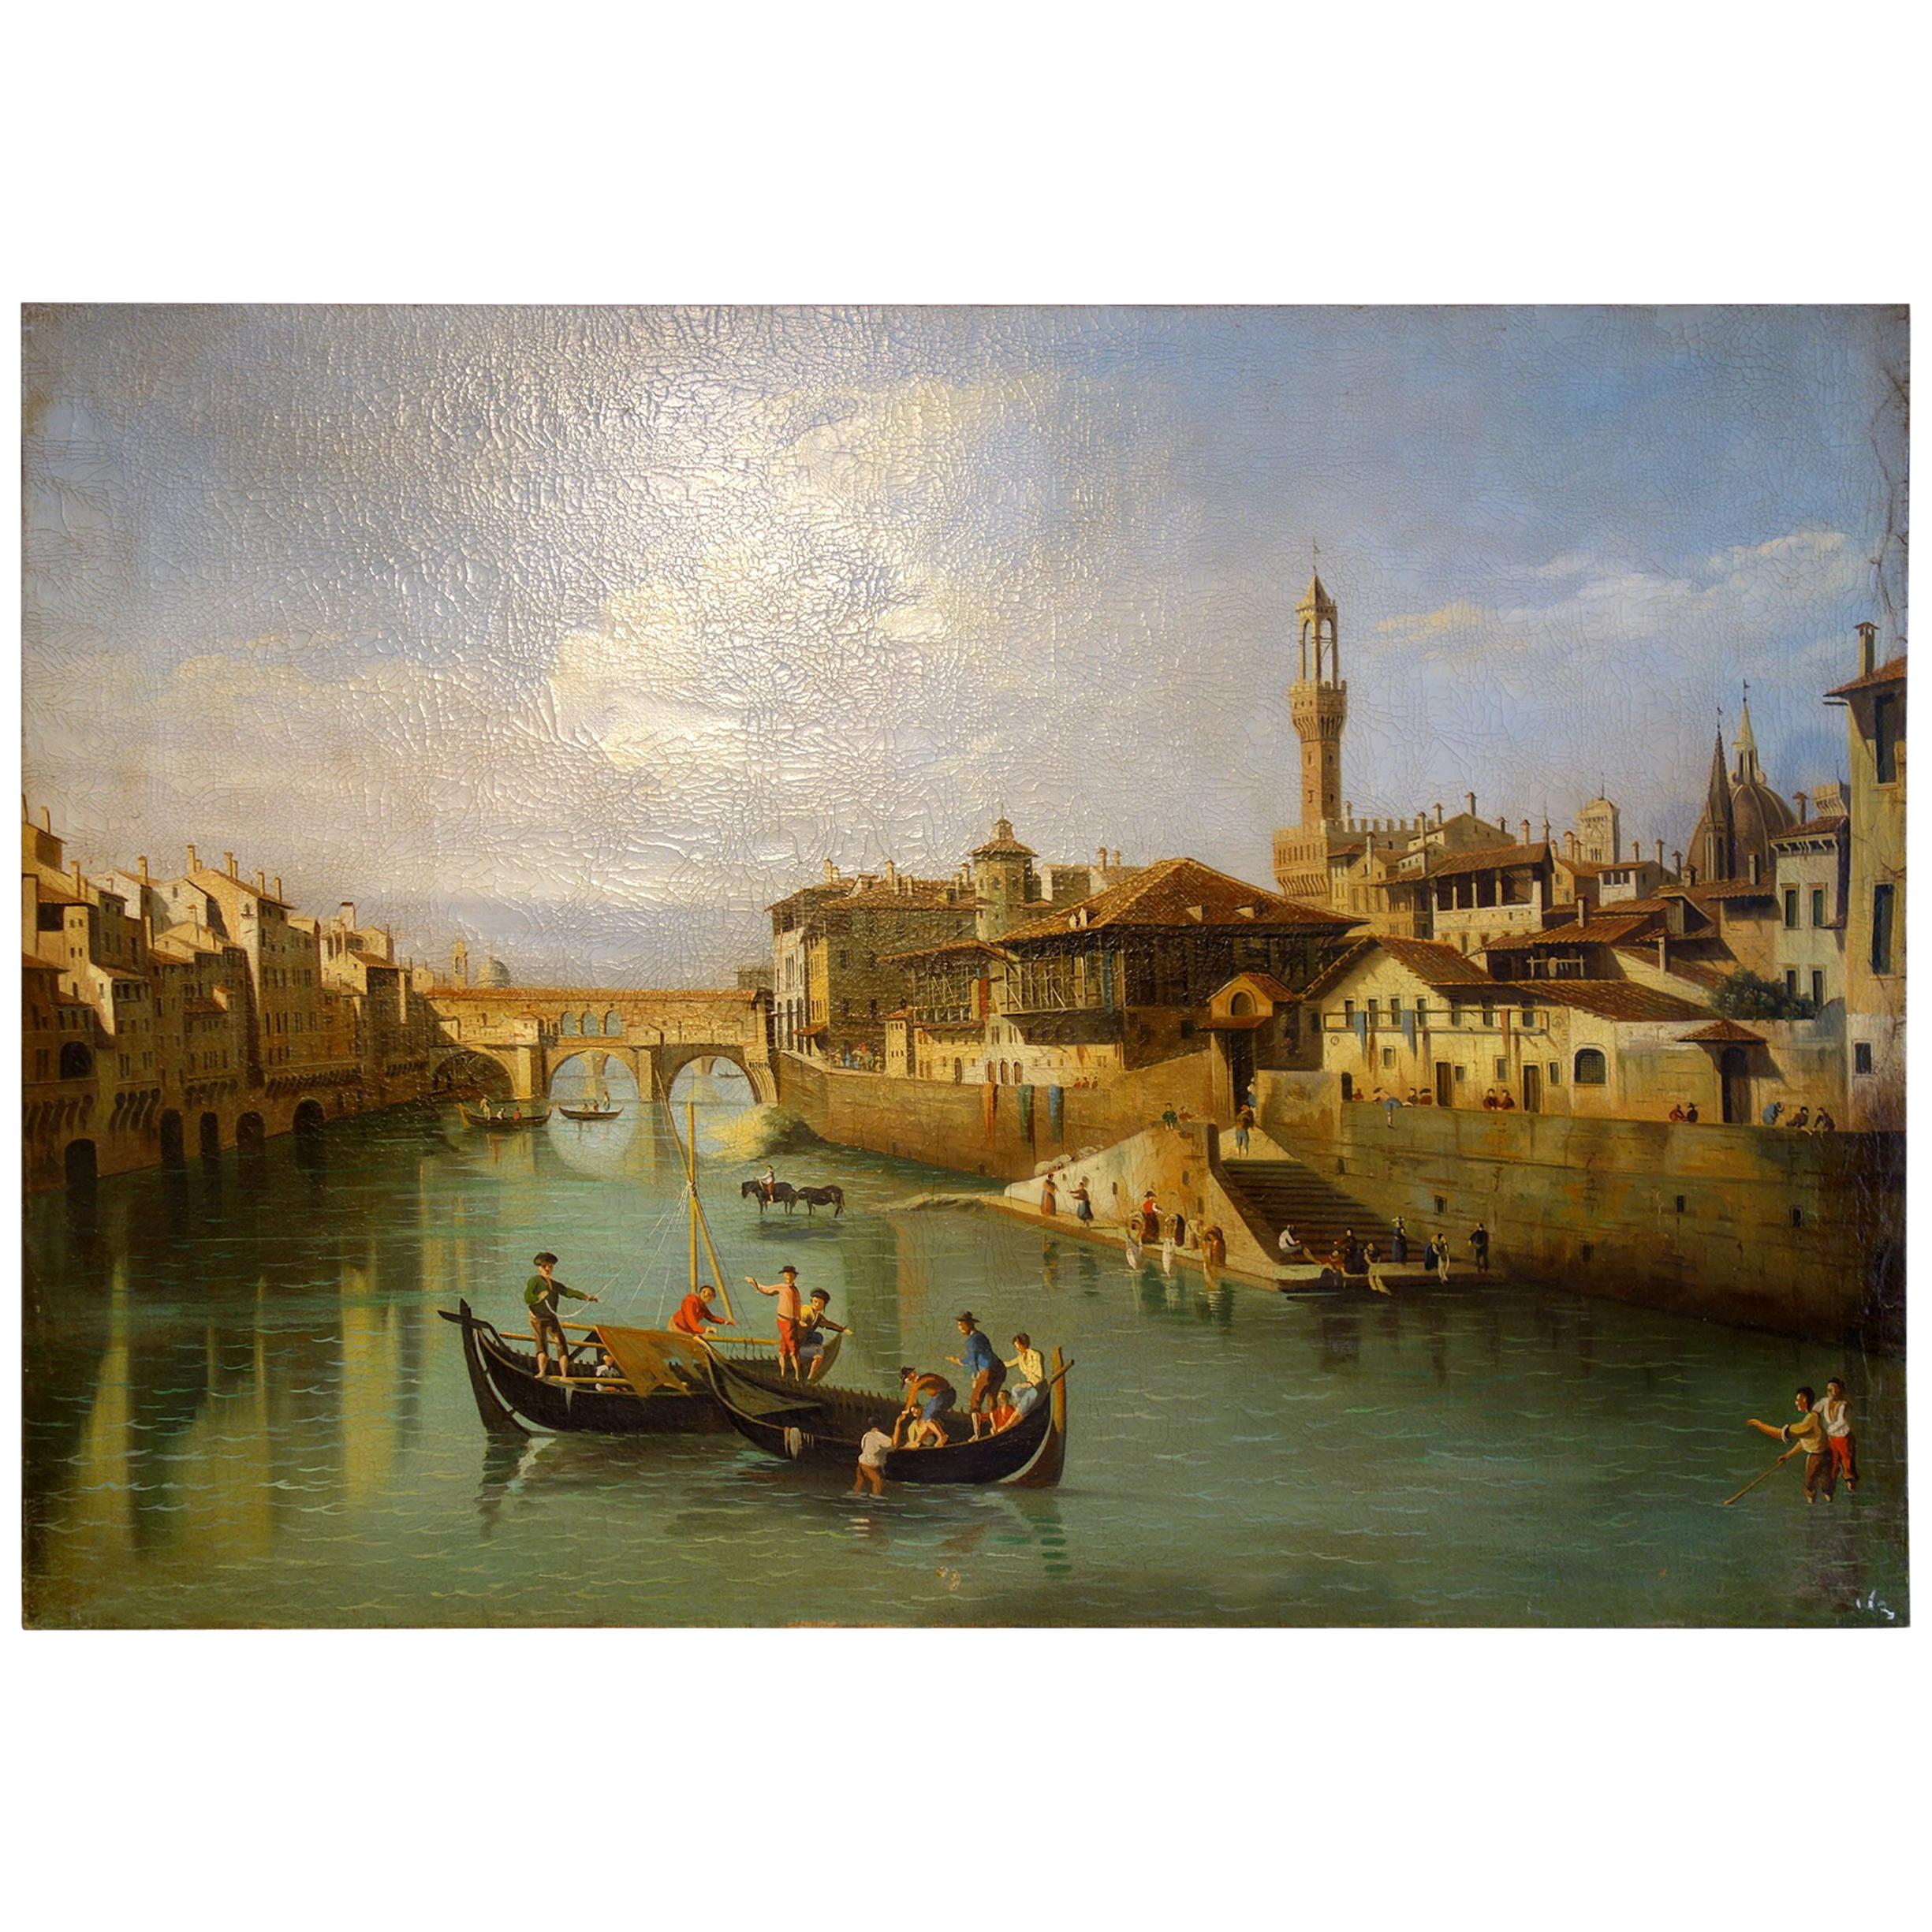 19th Century Renaissance Style Painting of Ponte Vecchio, Florence 1 of 3 in Set